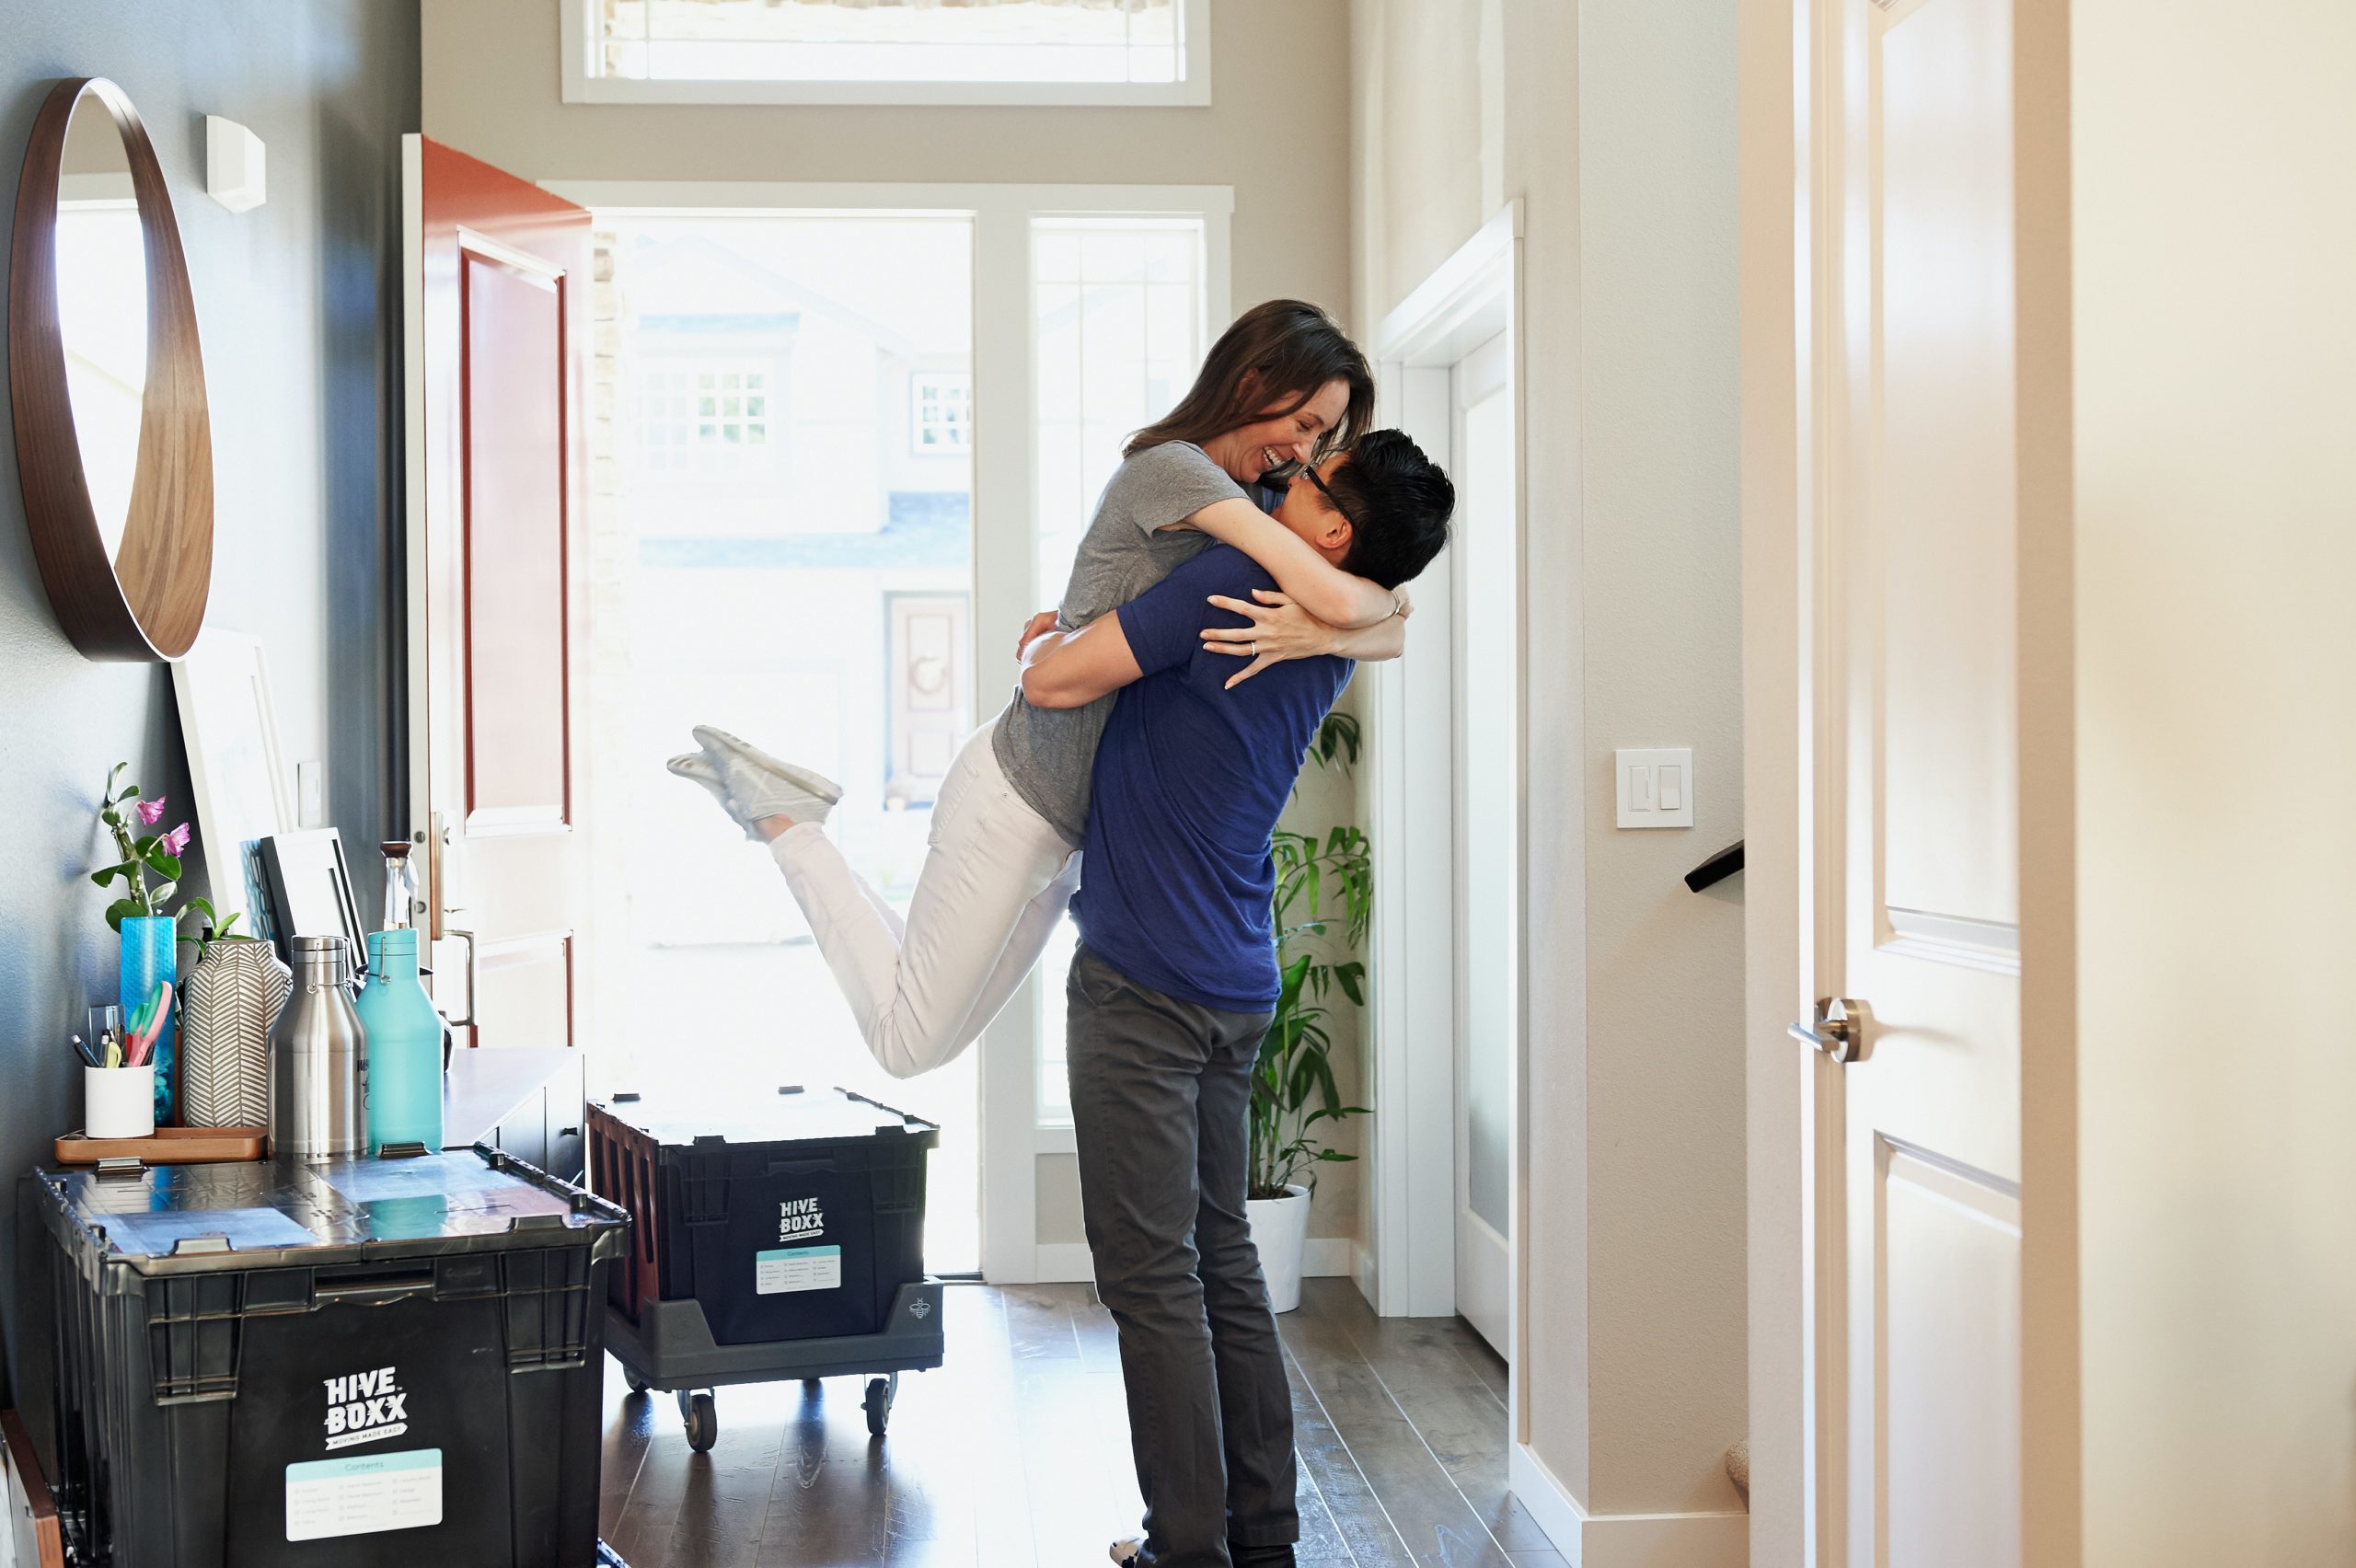 Cohabitation: The Best Way To Test A Relationship?